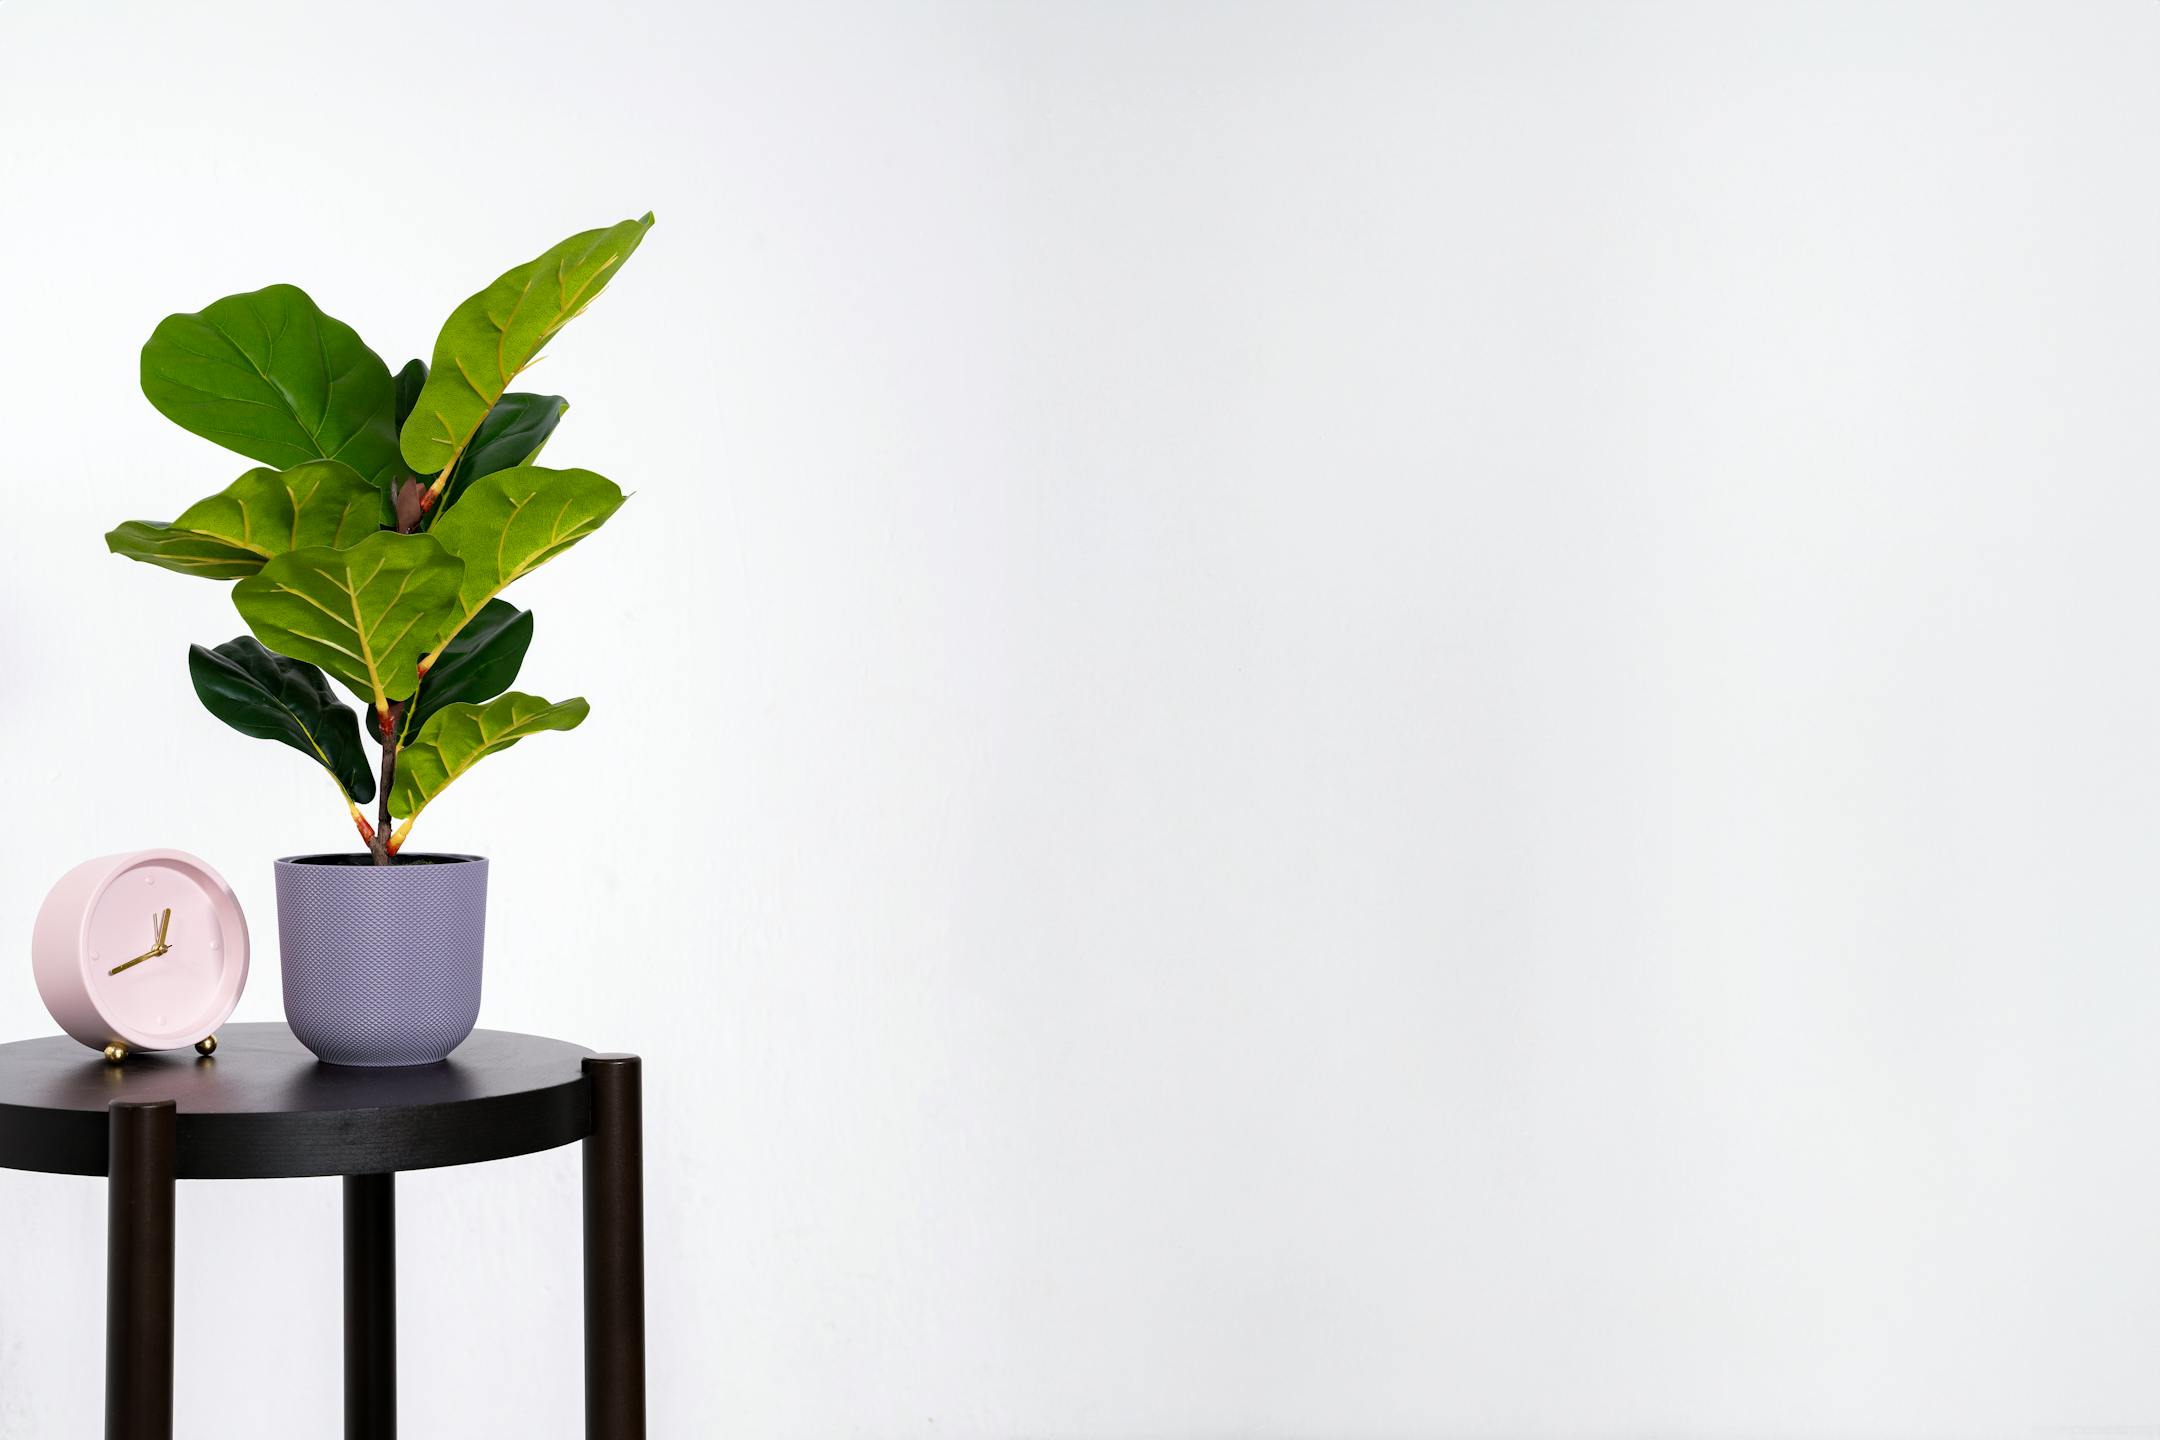 Artificial mini fiddle leaf houseplant on wooden table with clock